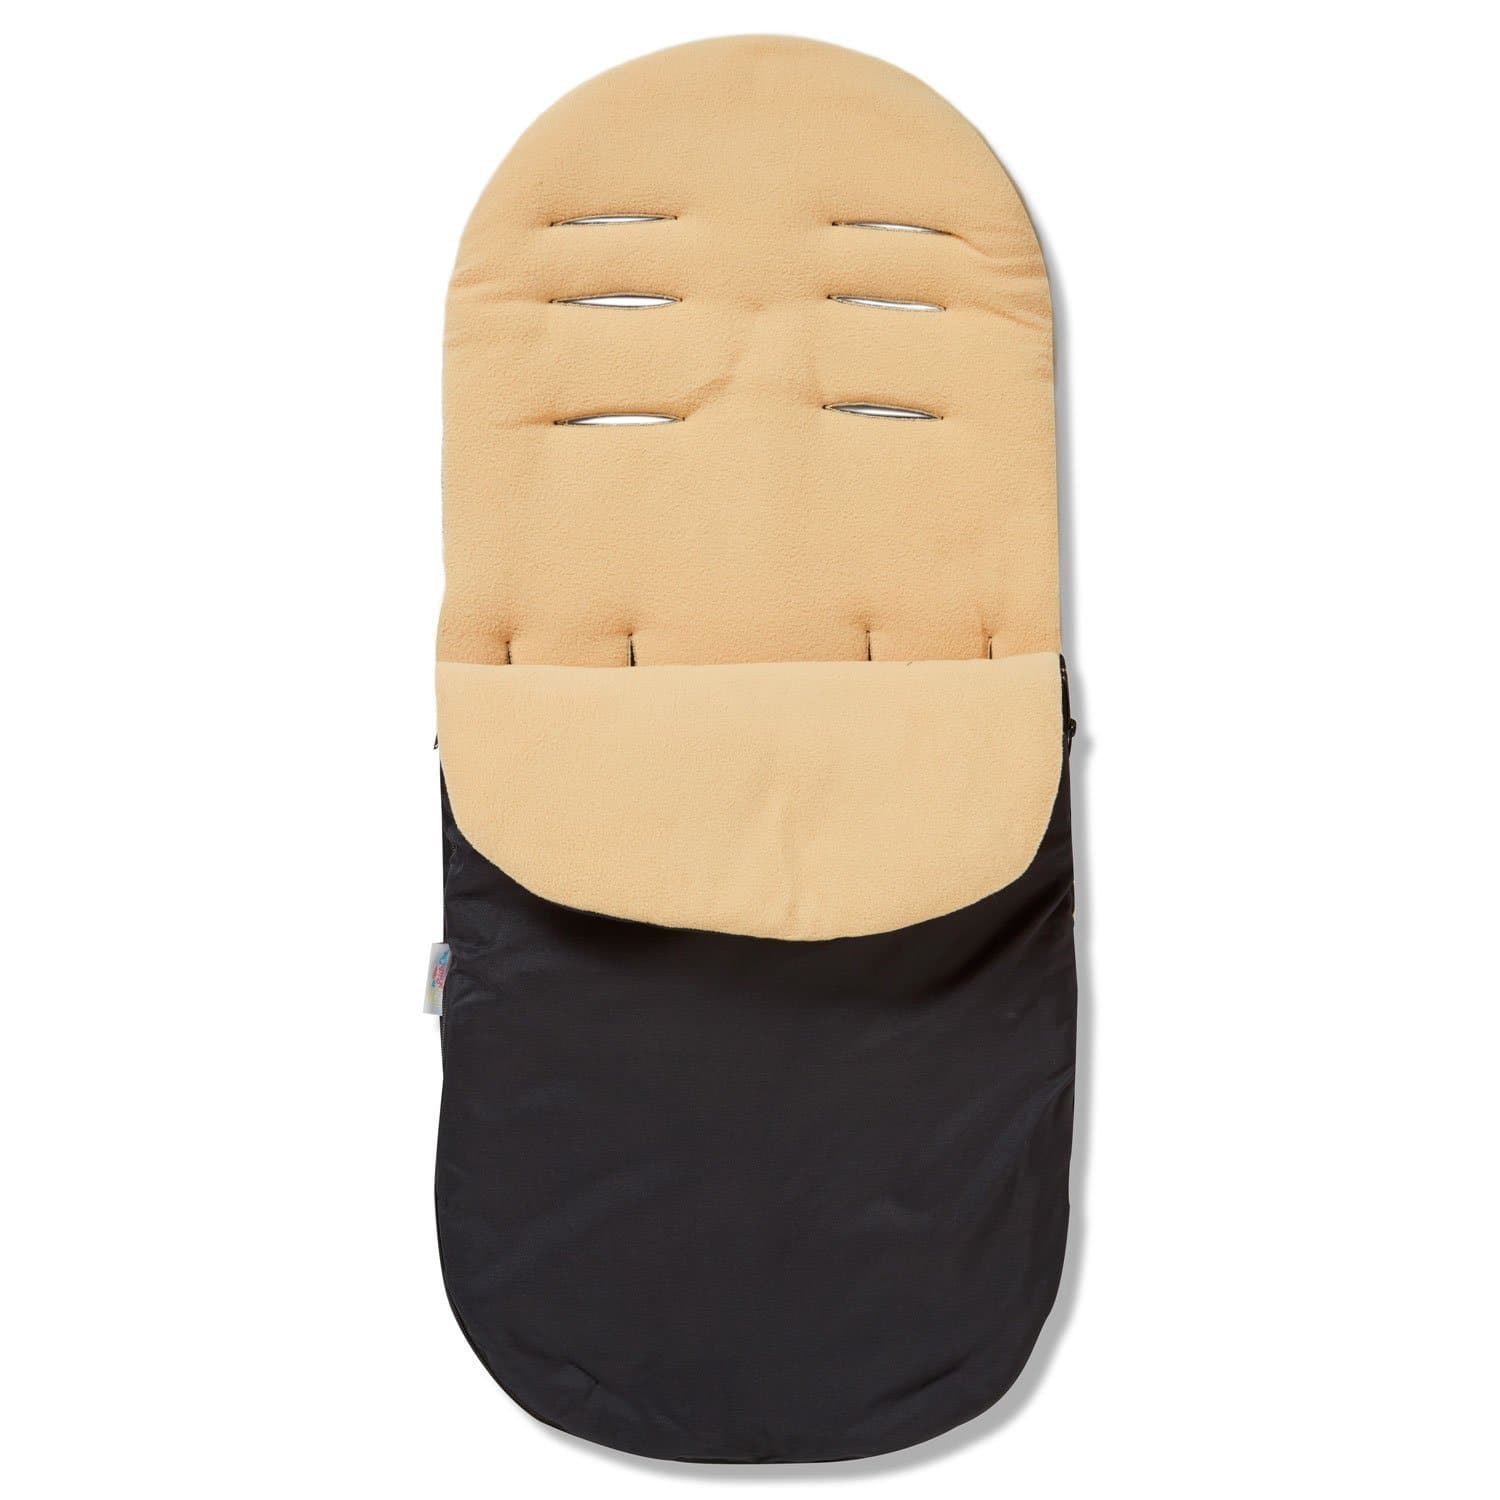 Footmuff / Cosy Toes Compatible with Recaro - Sand / Fits All Models | For Your Little One